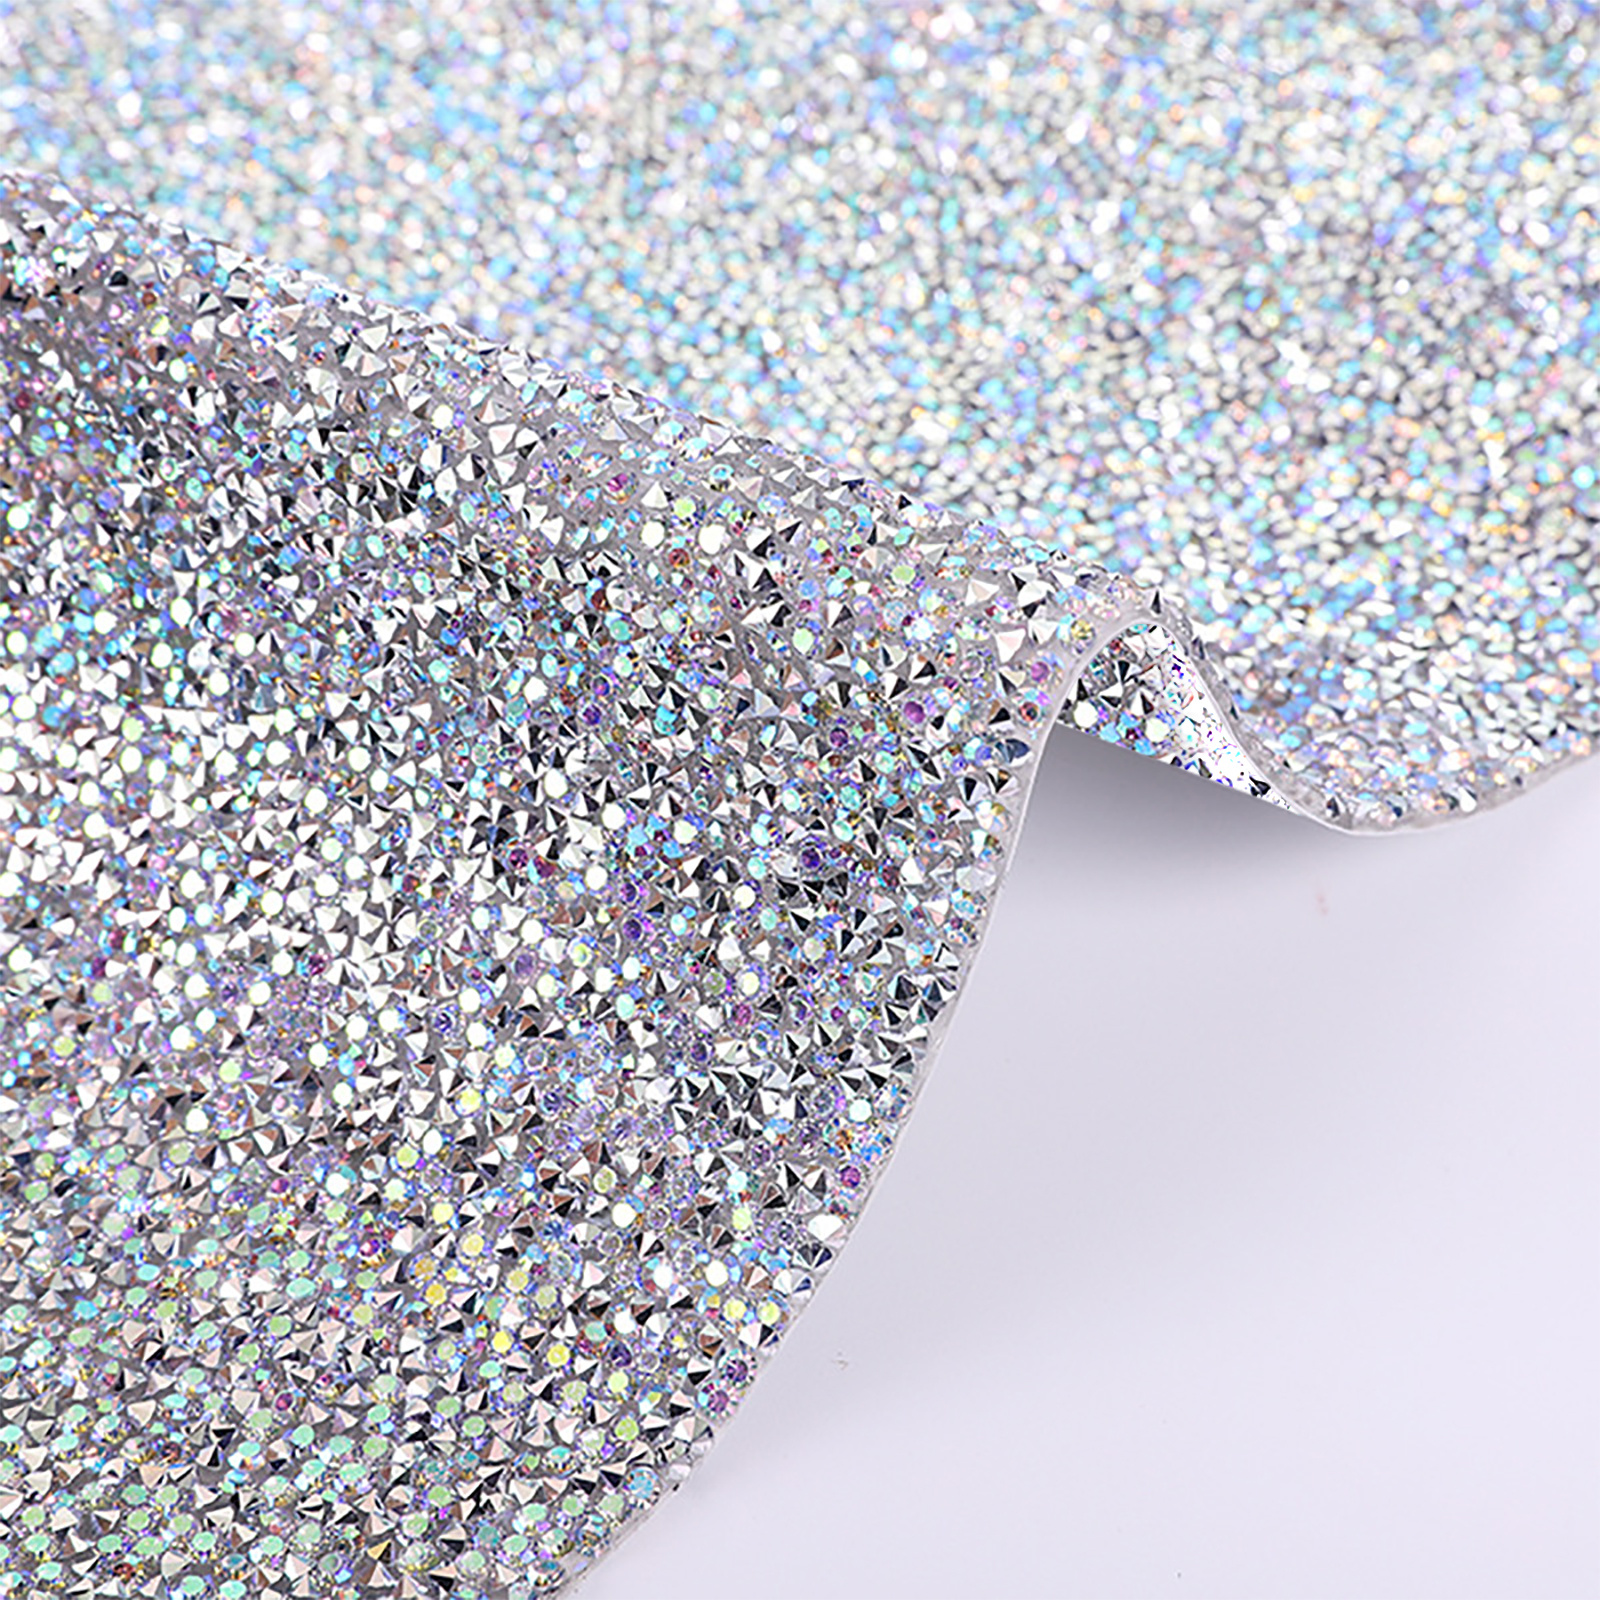 Zonon 60000 Pieces Rhinestone Sheets Stickers Self Adhesive Bling Crystal  DIY Glitter Car Decorations Resin Stickers for Car Cellphone Crafts